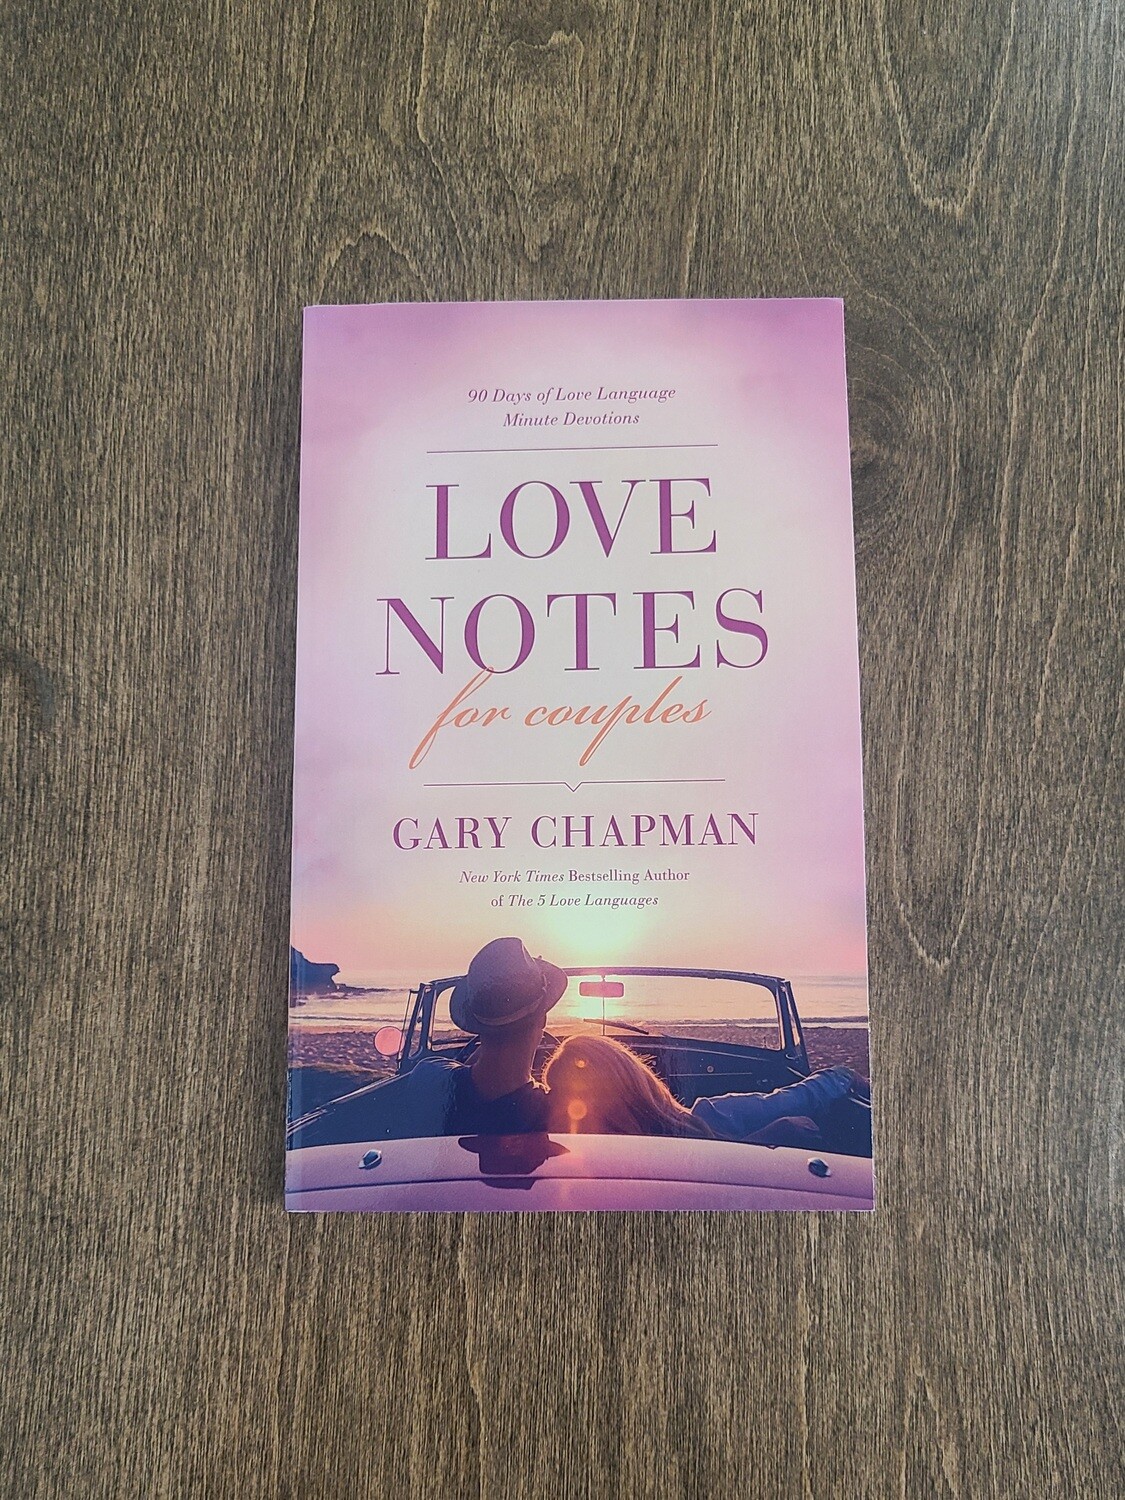 Love Notes for Couples: 90 Days of Love Language Minute Devotions by Gary Chapman